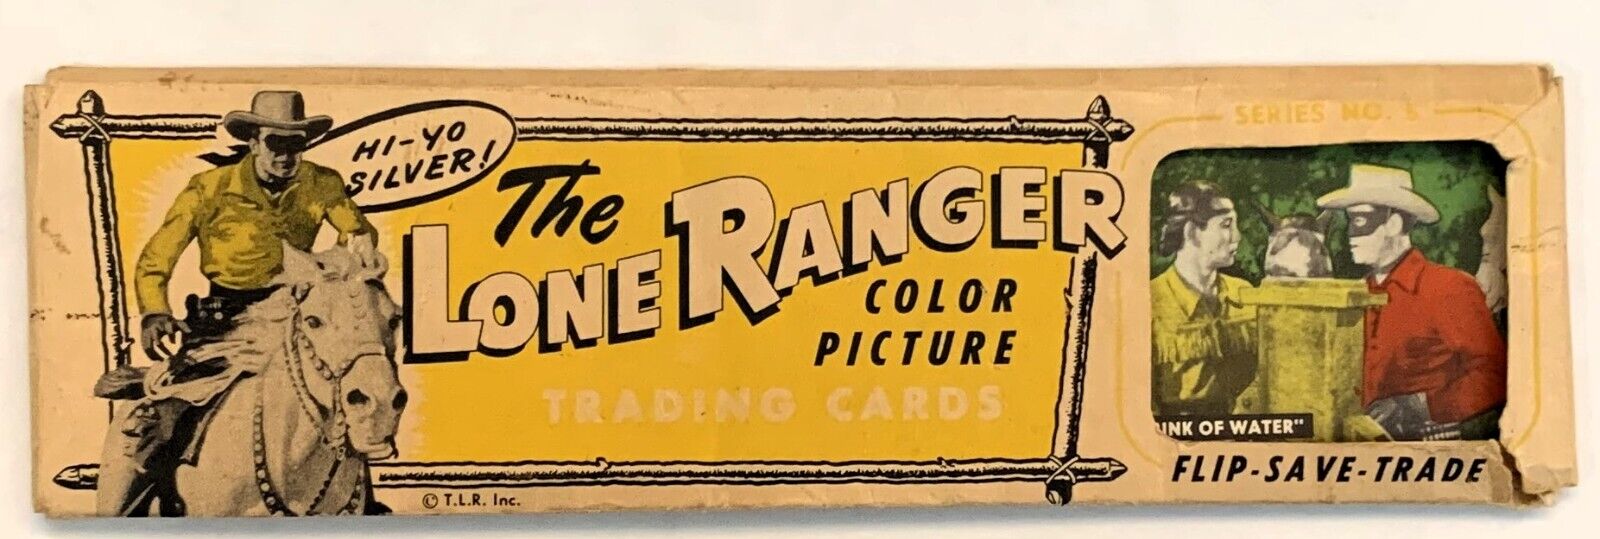 1950 Ed-U-Cards The Lone Ranger 3 Cards and Holder